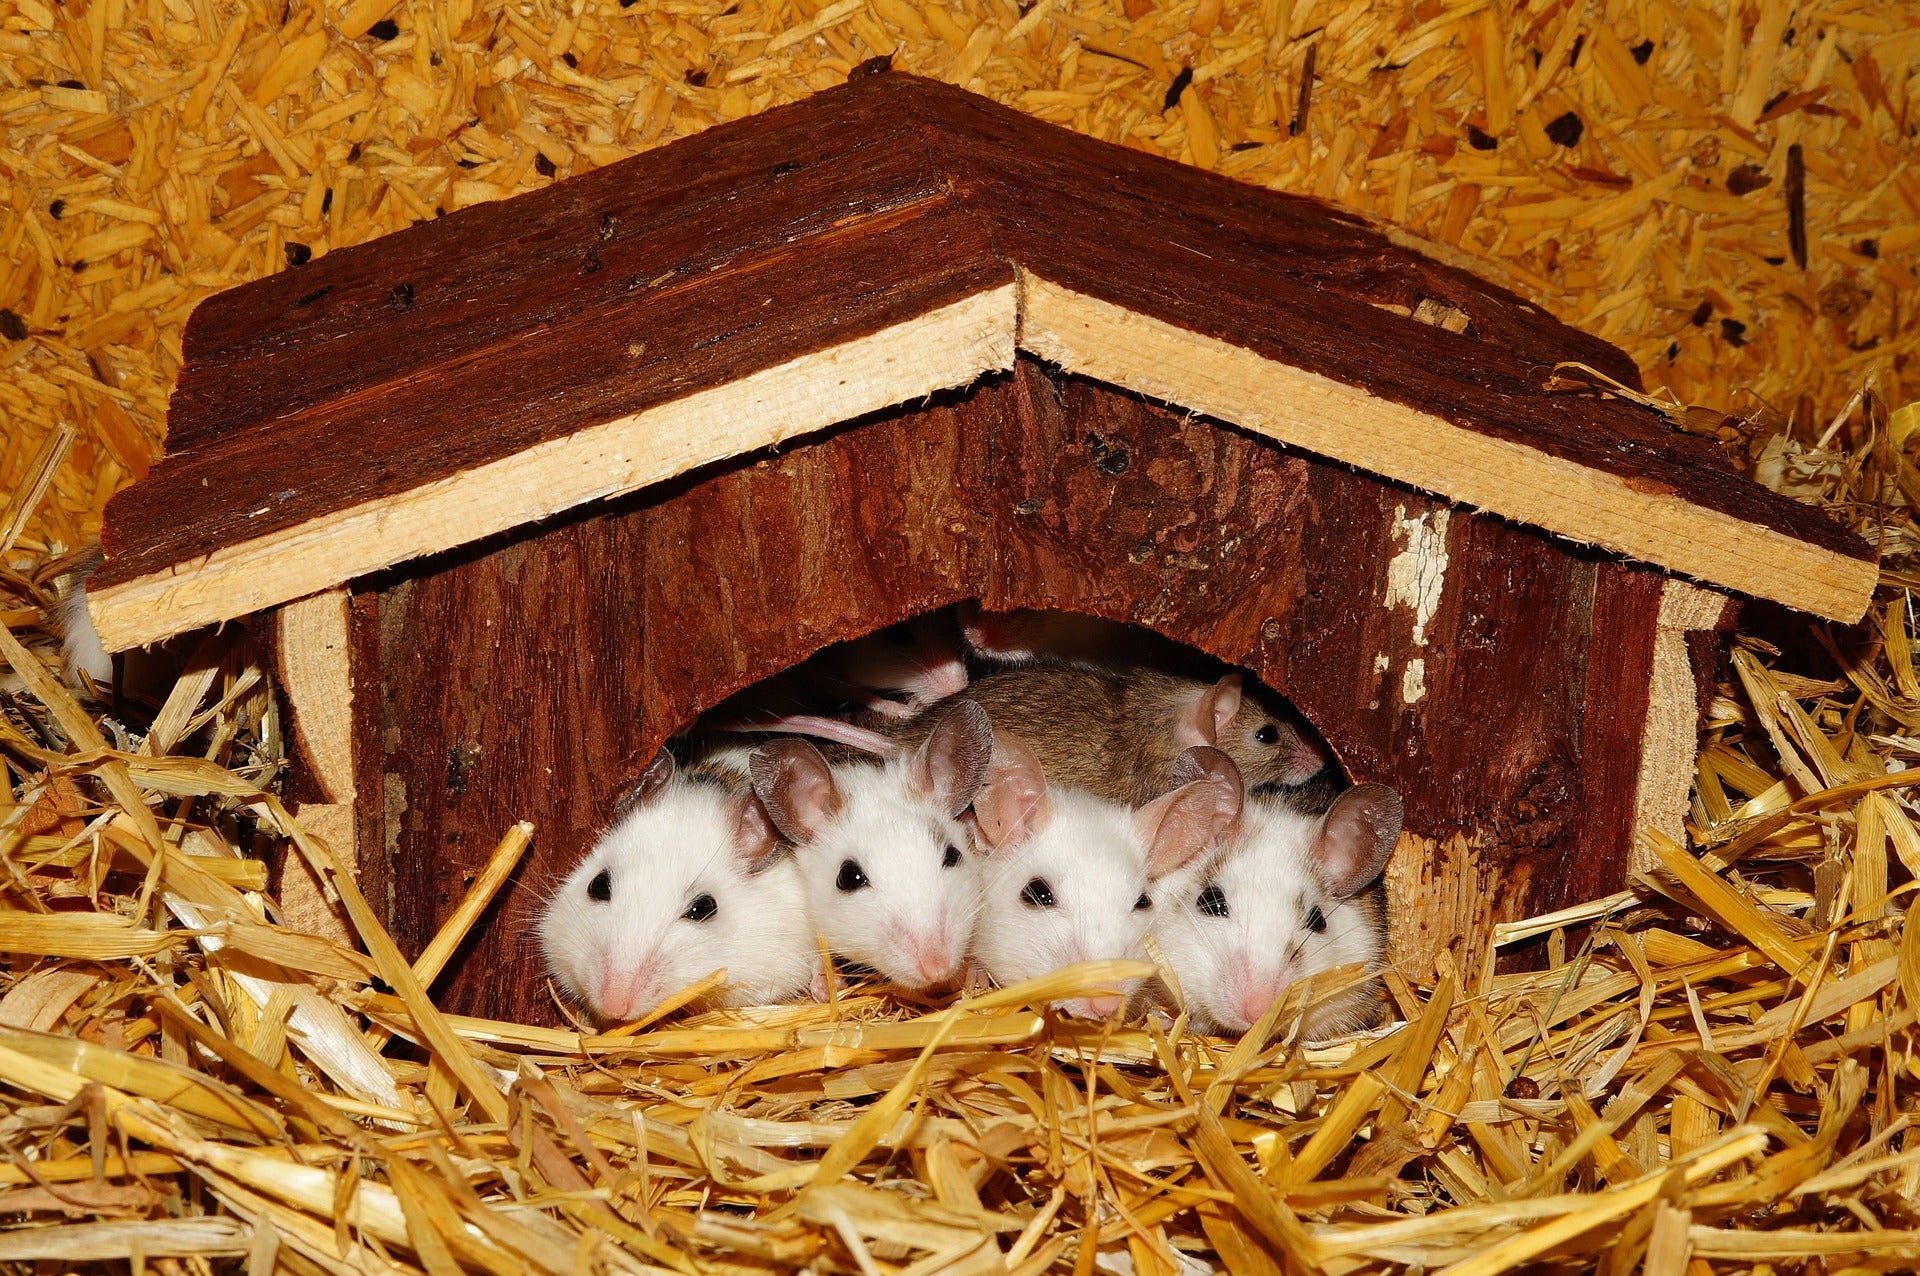 Youthful mice discover to parent by babysitting